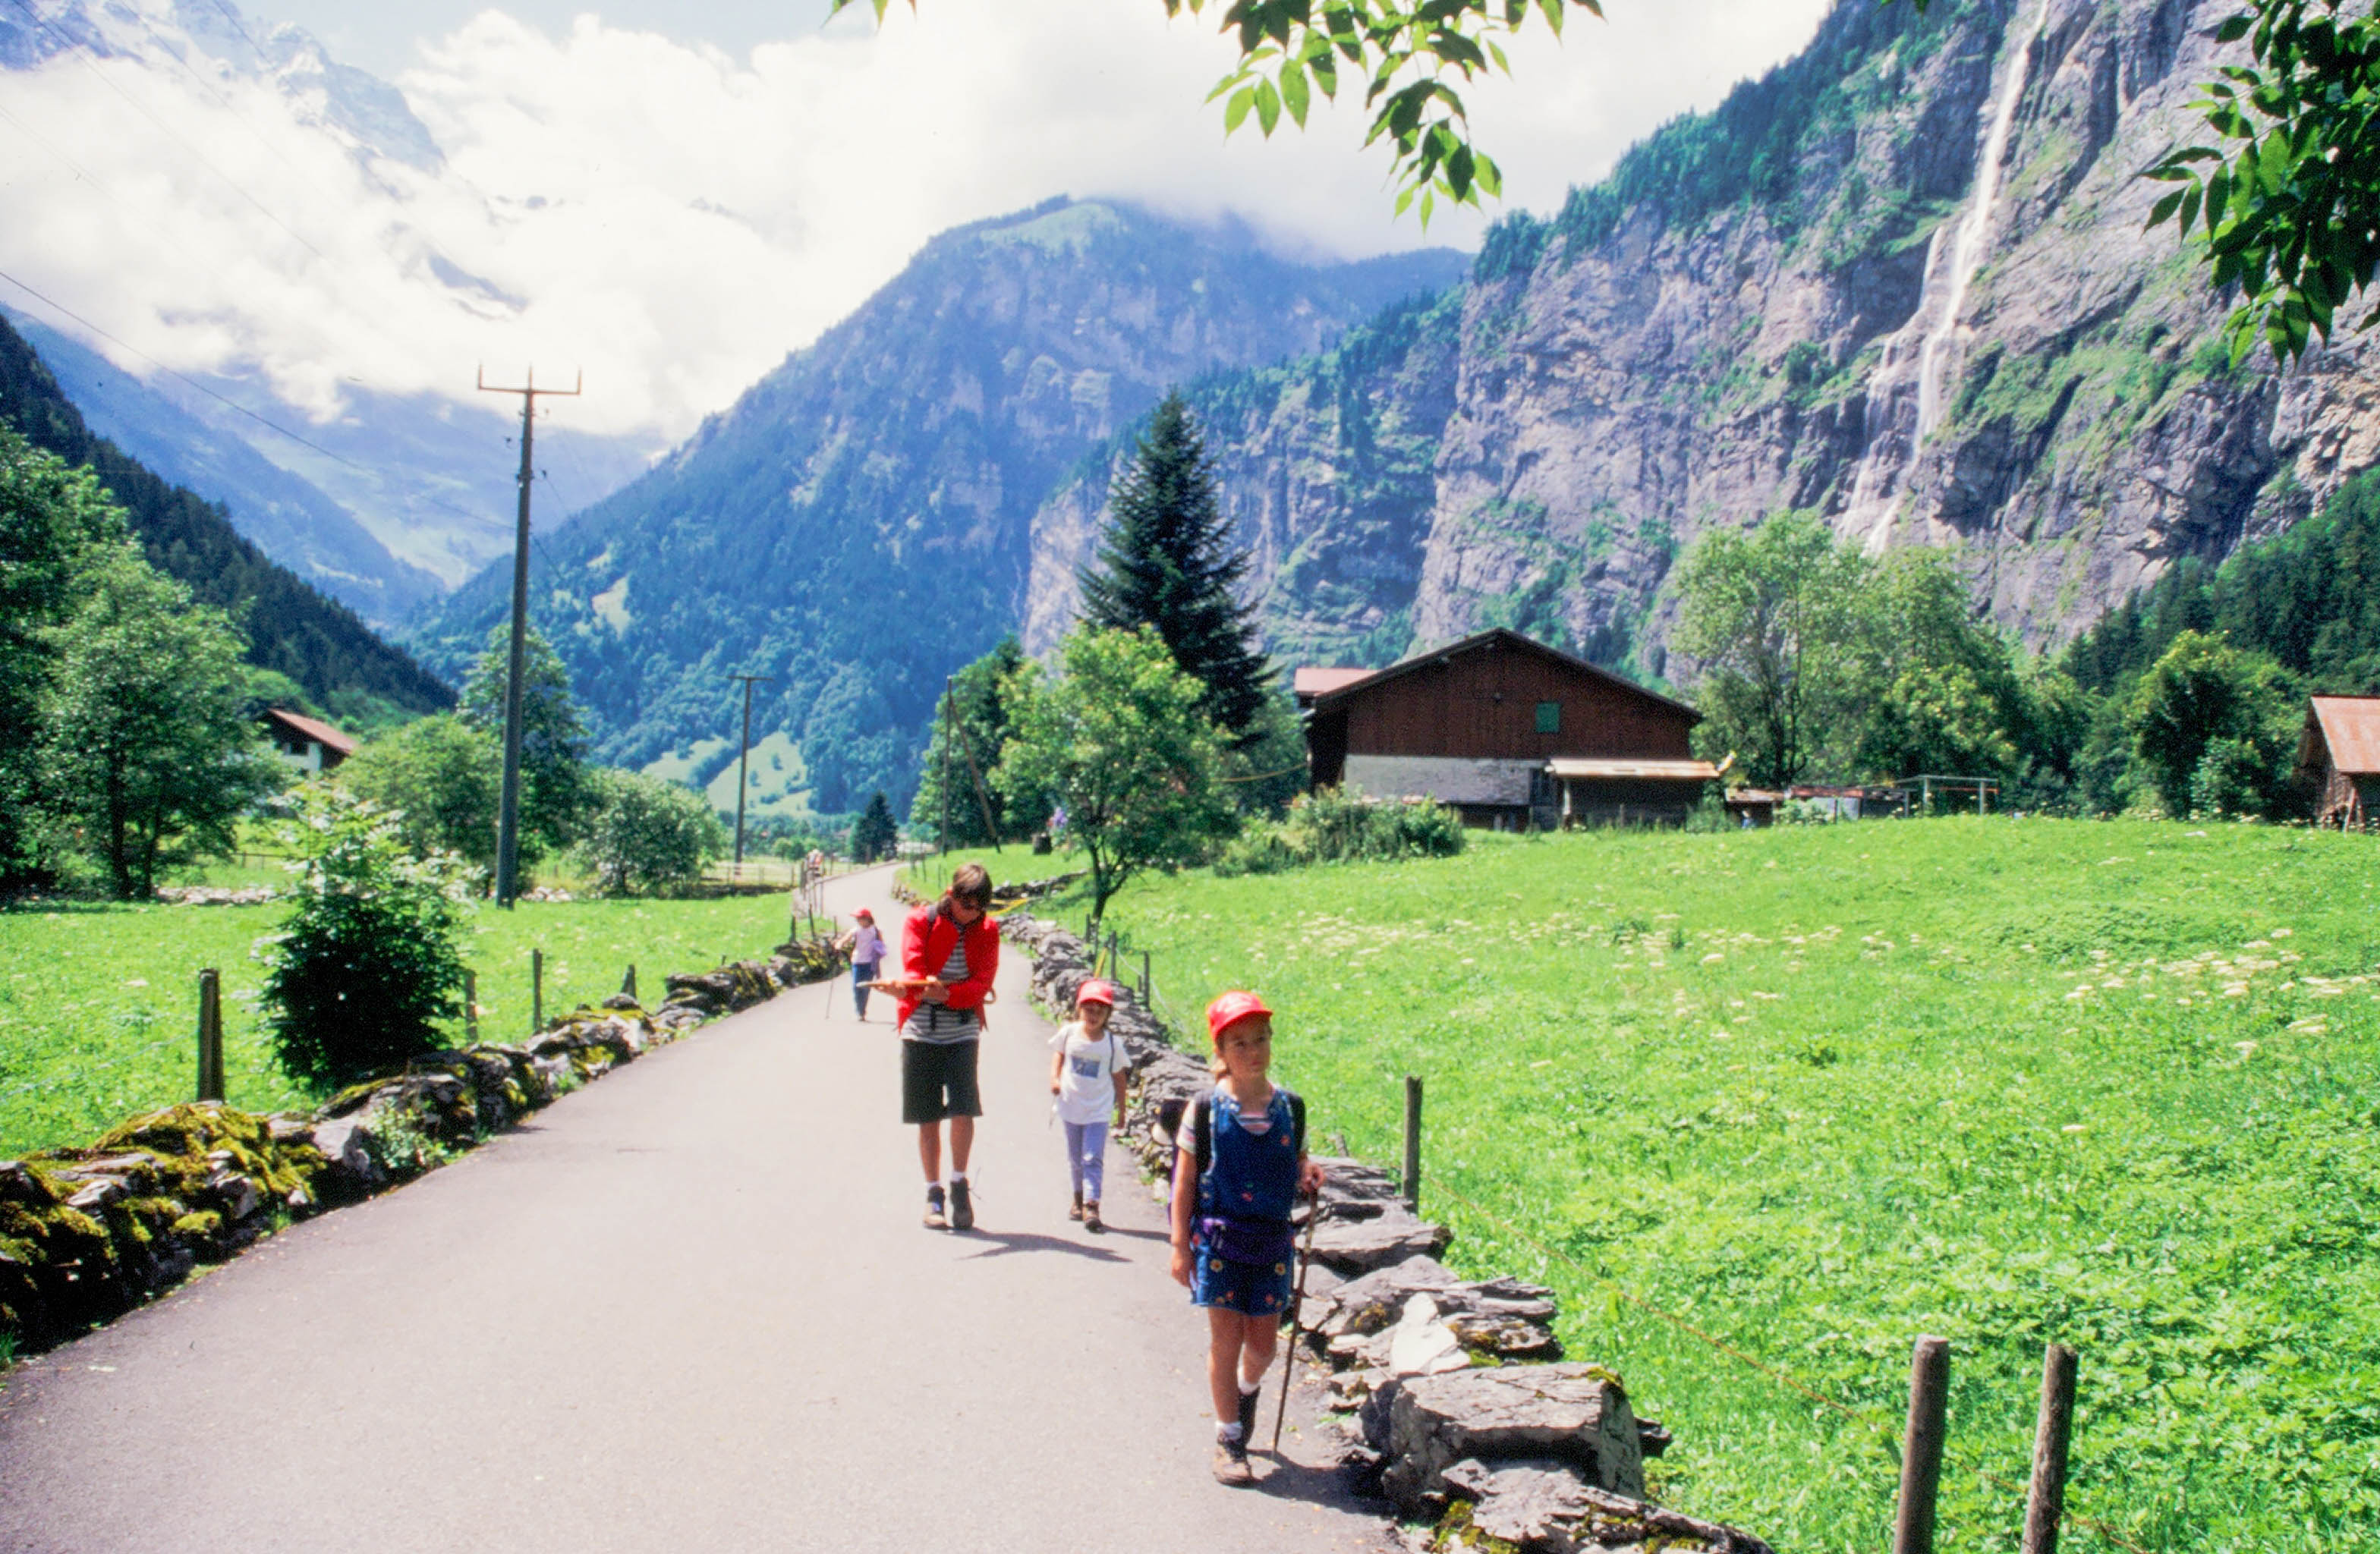 Three kids walking through a valley in Switzerland, illustrating how wanderlust is passed down in traveling families (image © Peter Boynton).